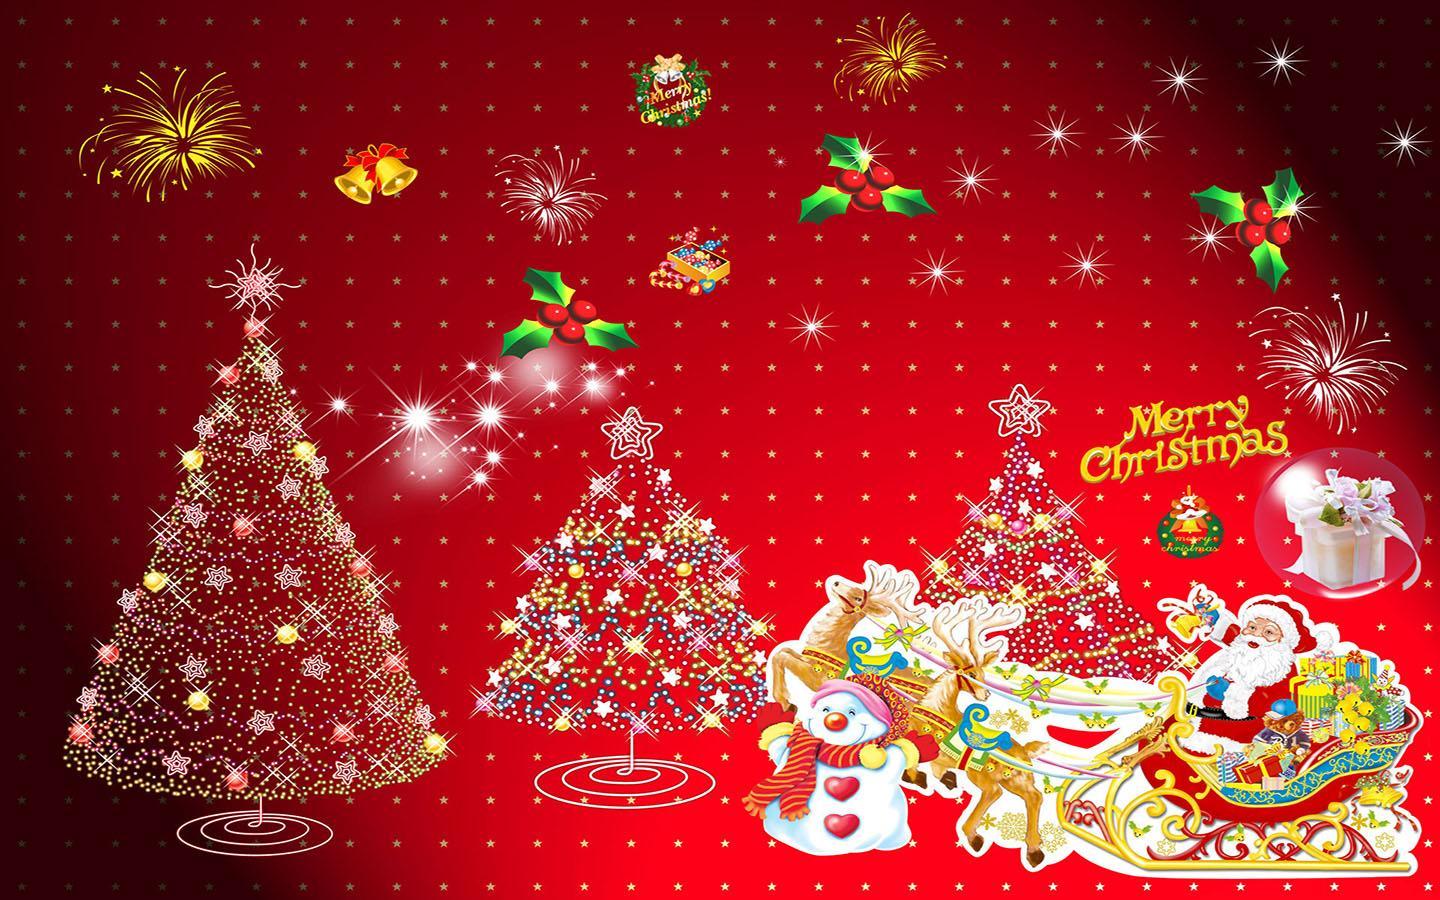 Merry Christmas Wallpaper, Abstract Style Merry Christmas Wallpaper